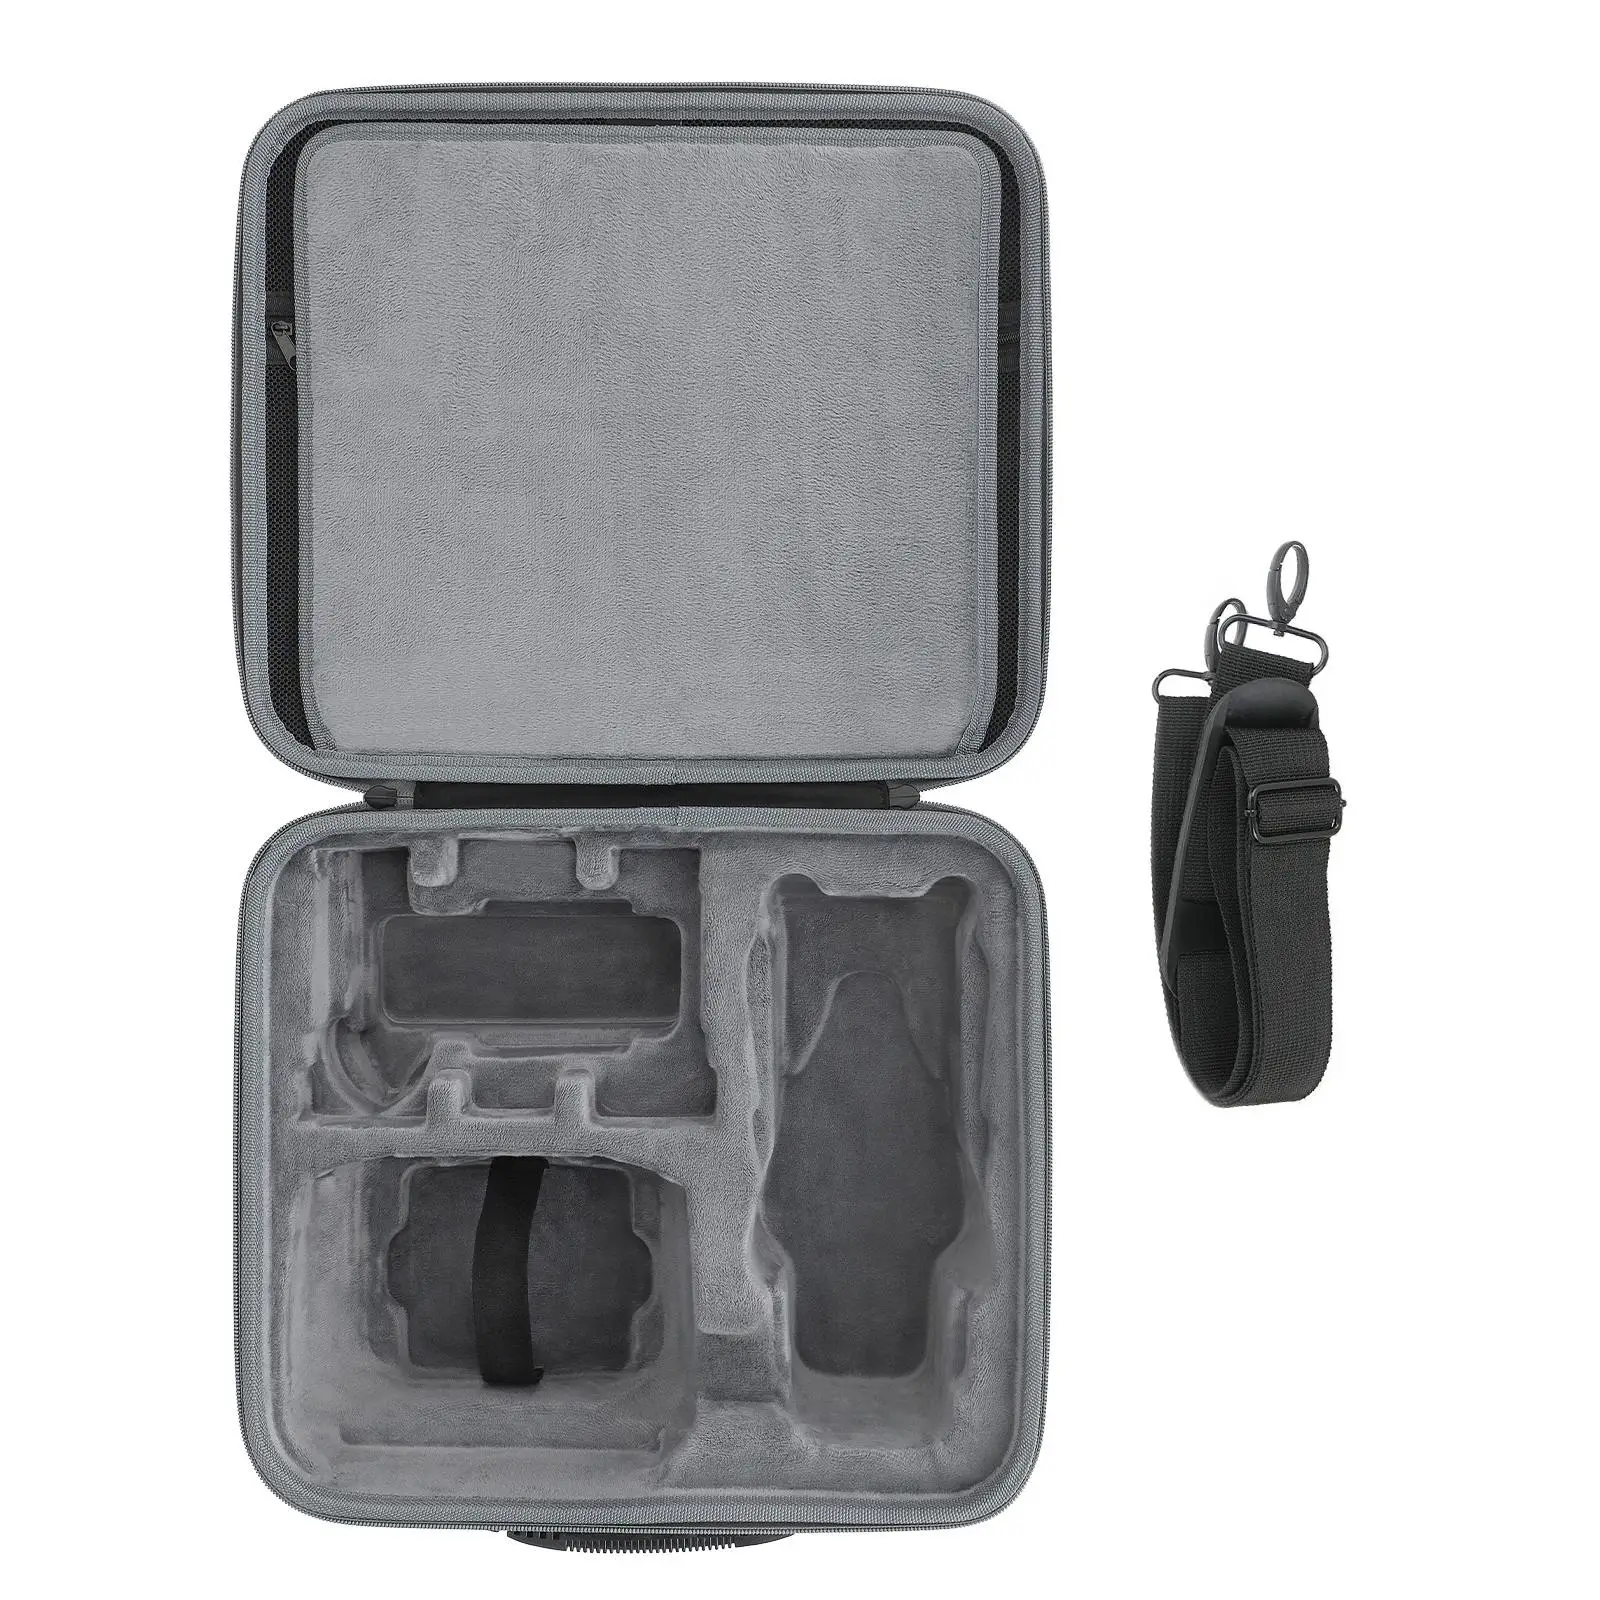 Hard Carrying Case Dustproof Shockproof Hard Protective Case for Mavic 3 Pro Helicopter Rc-n1 Mavic 3 Classic Remote Controller